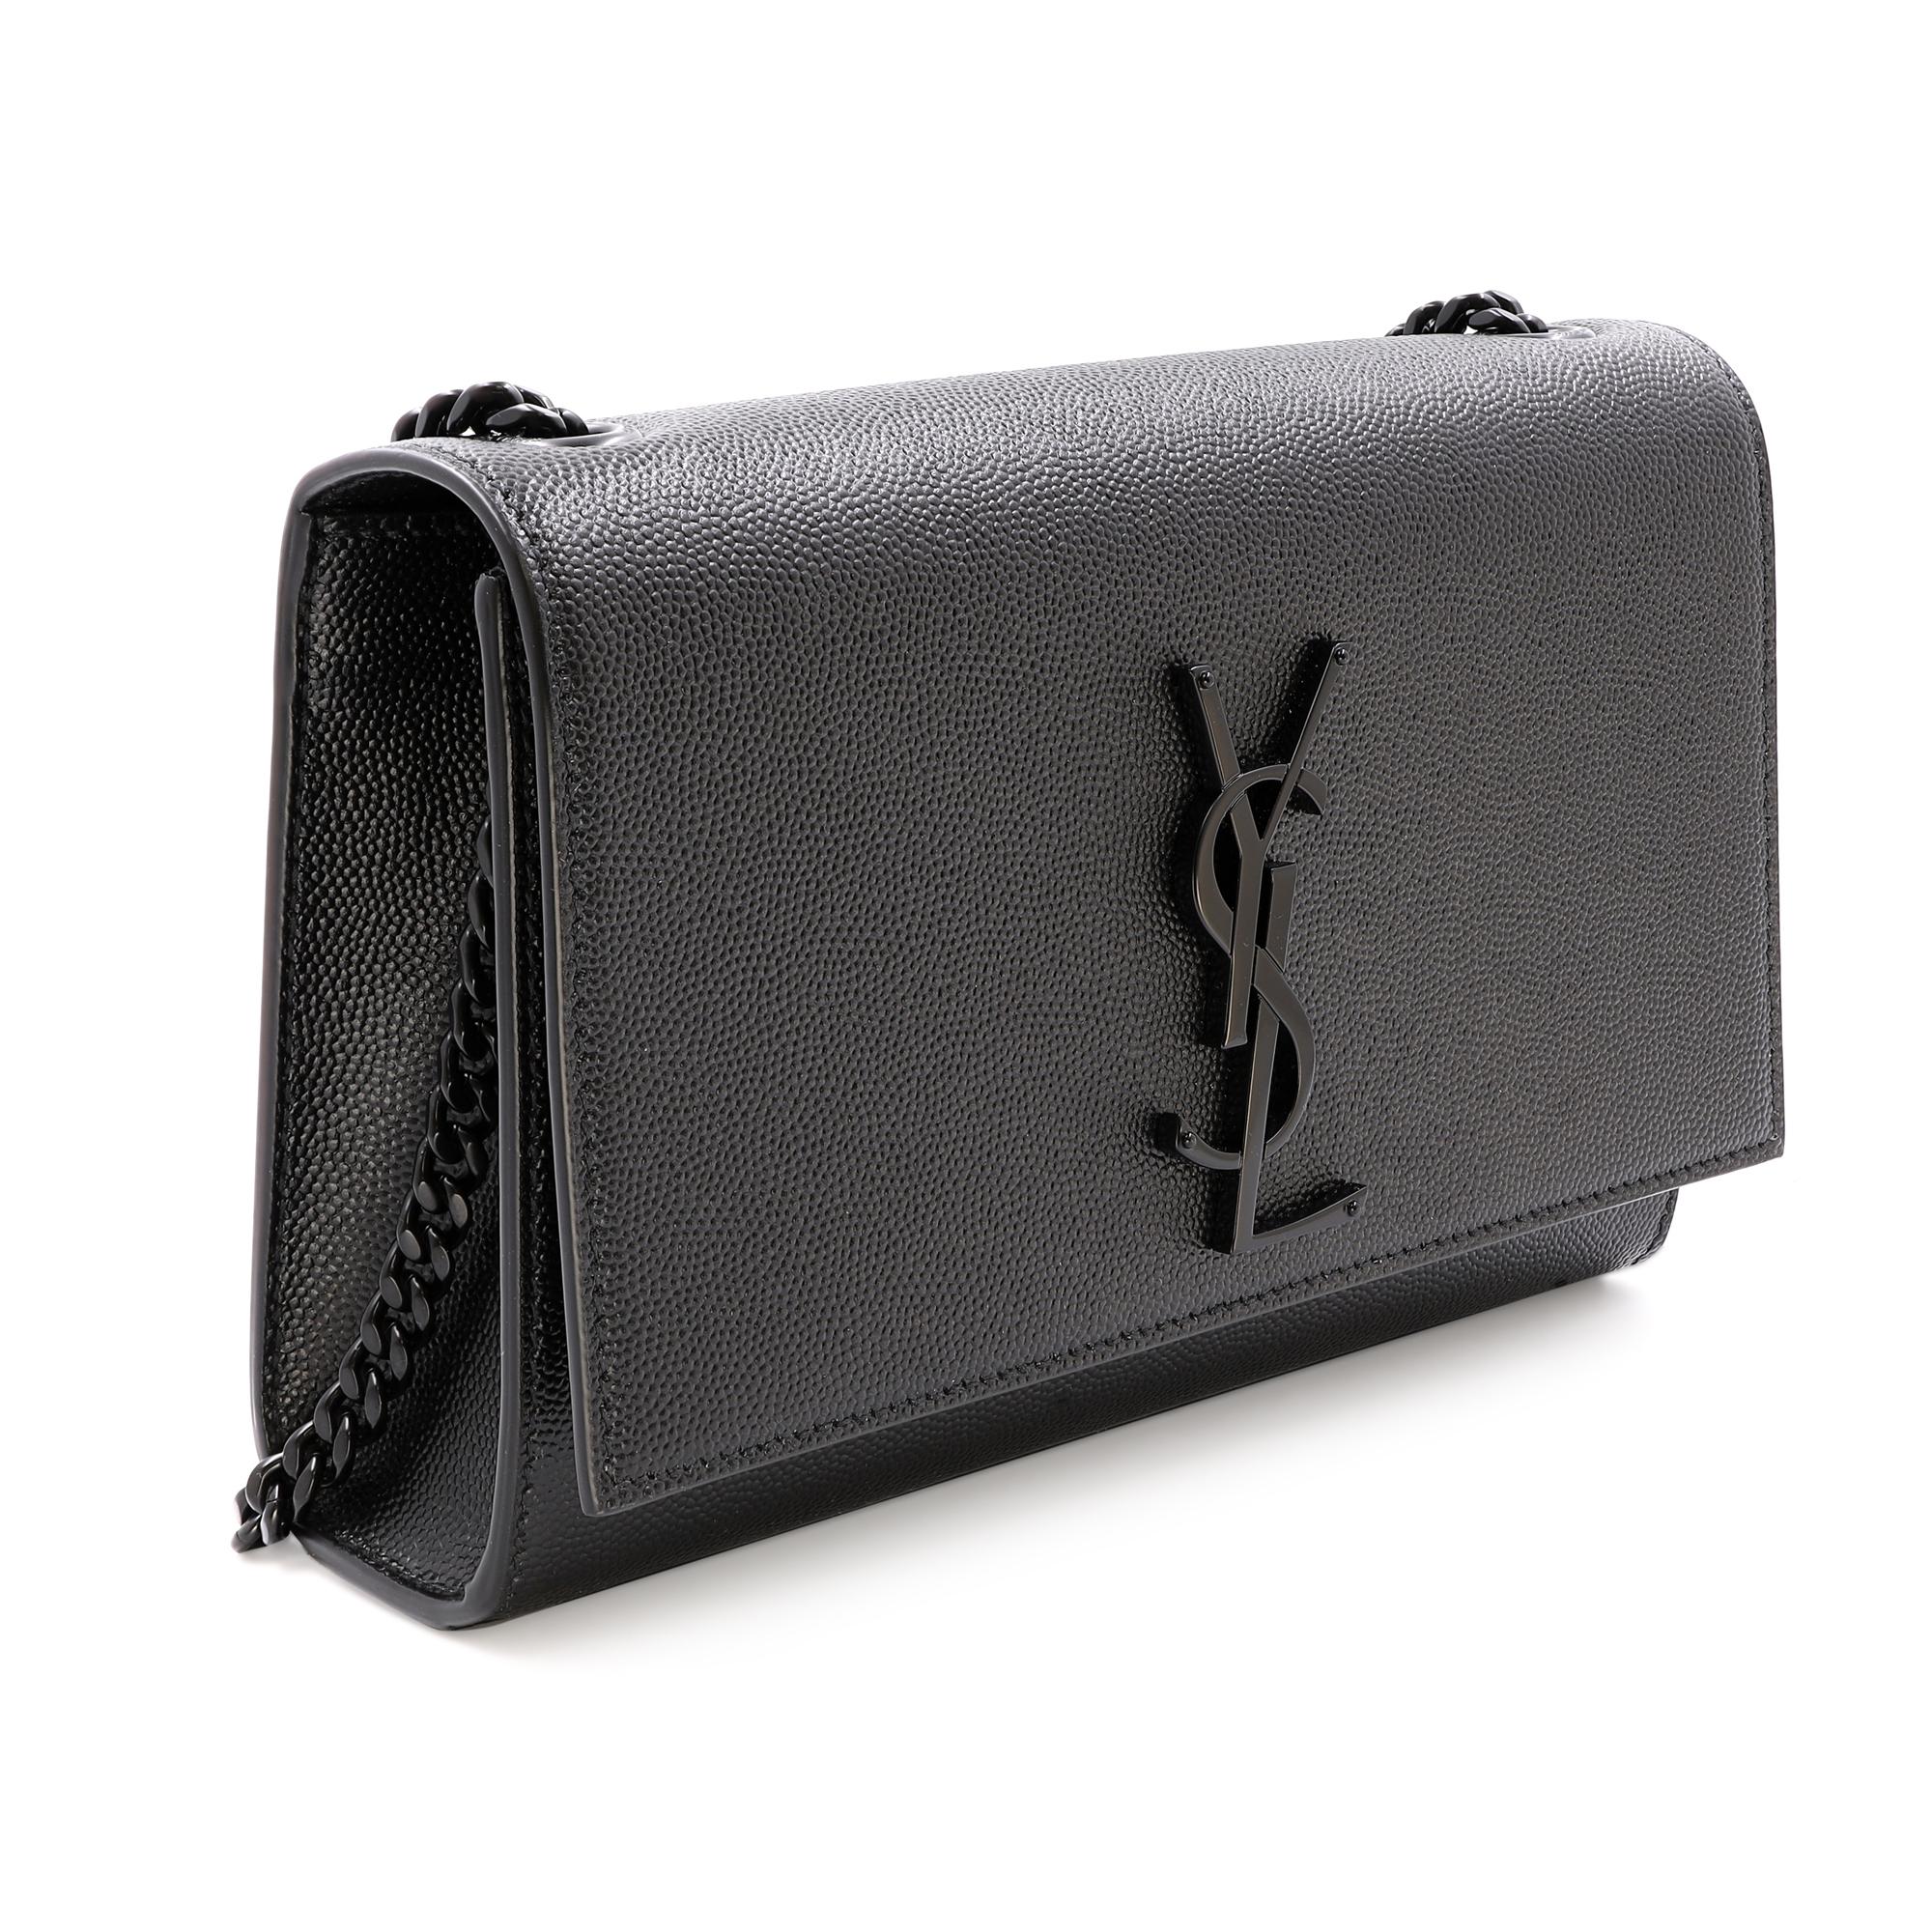 Saint Laurent Kate small shoulder bag. Featuring grained black leather with black tone logo hardware detail on the front. Comes with an adjustable black tone chain shoulder strap. The strap can be worn single or doubled. Magnetic snap flap closure